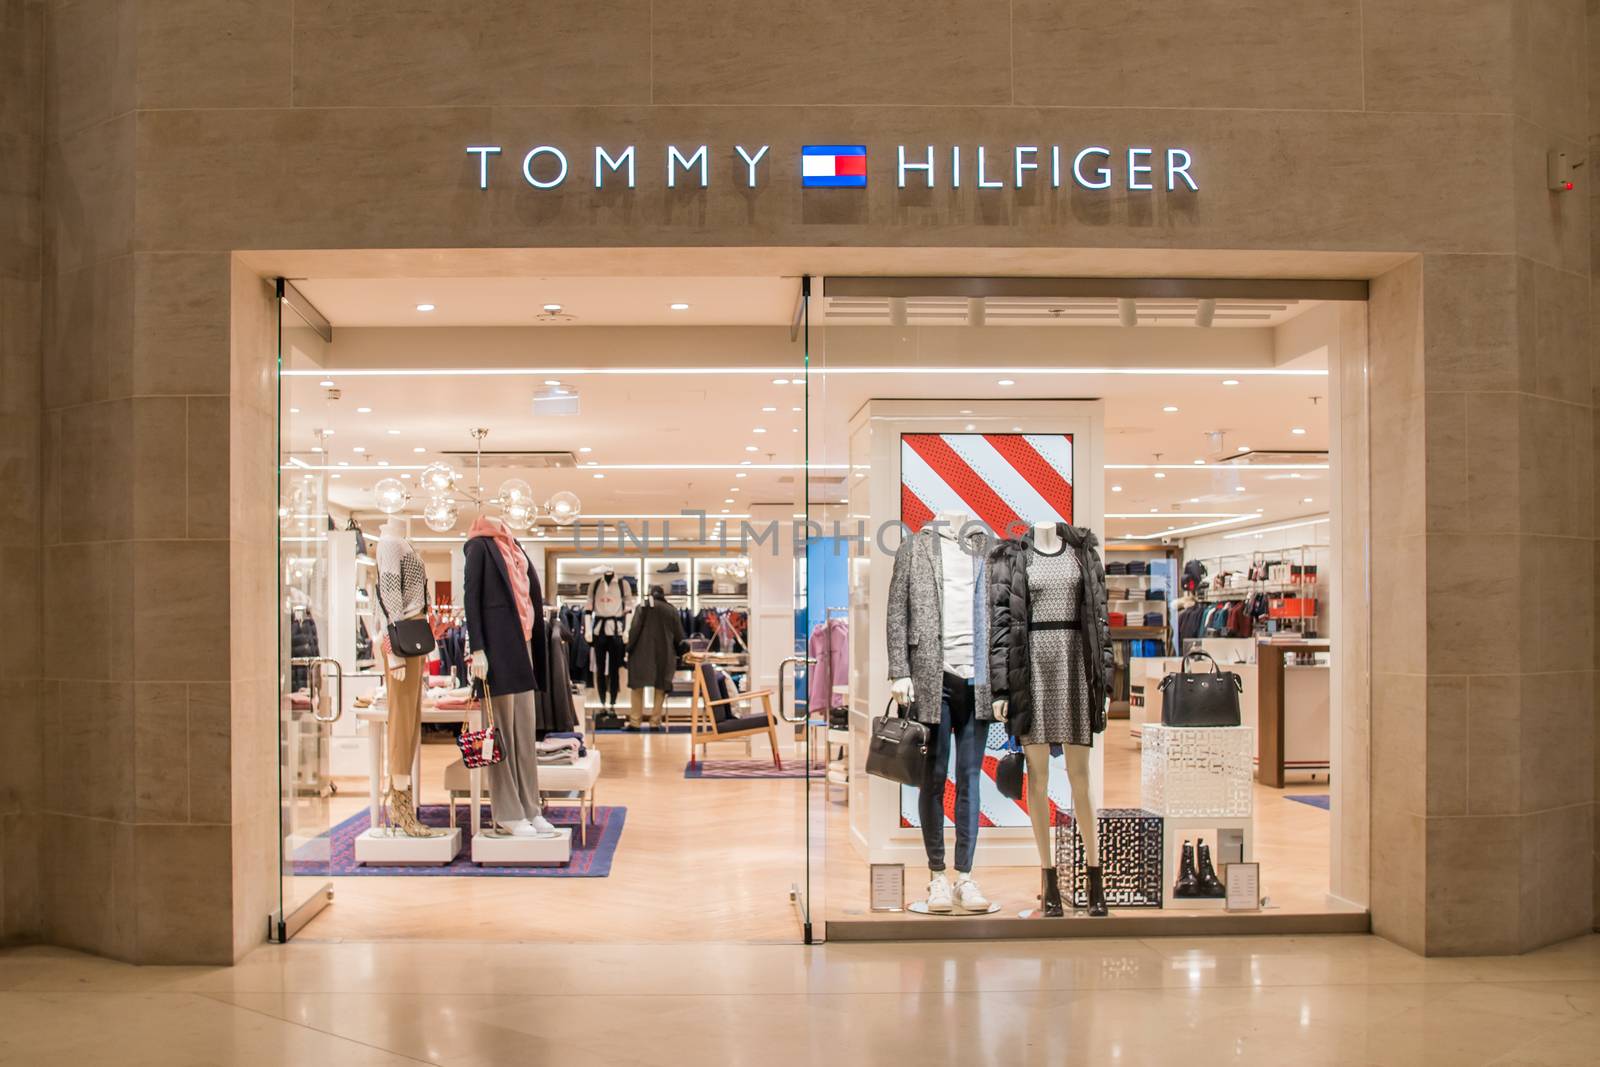 Tommy hilfiger Store in Paris, France, Luxury Clothing brand shop in "Le Louvre" by ontheroadagain